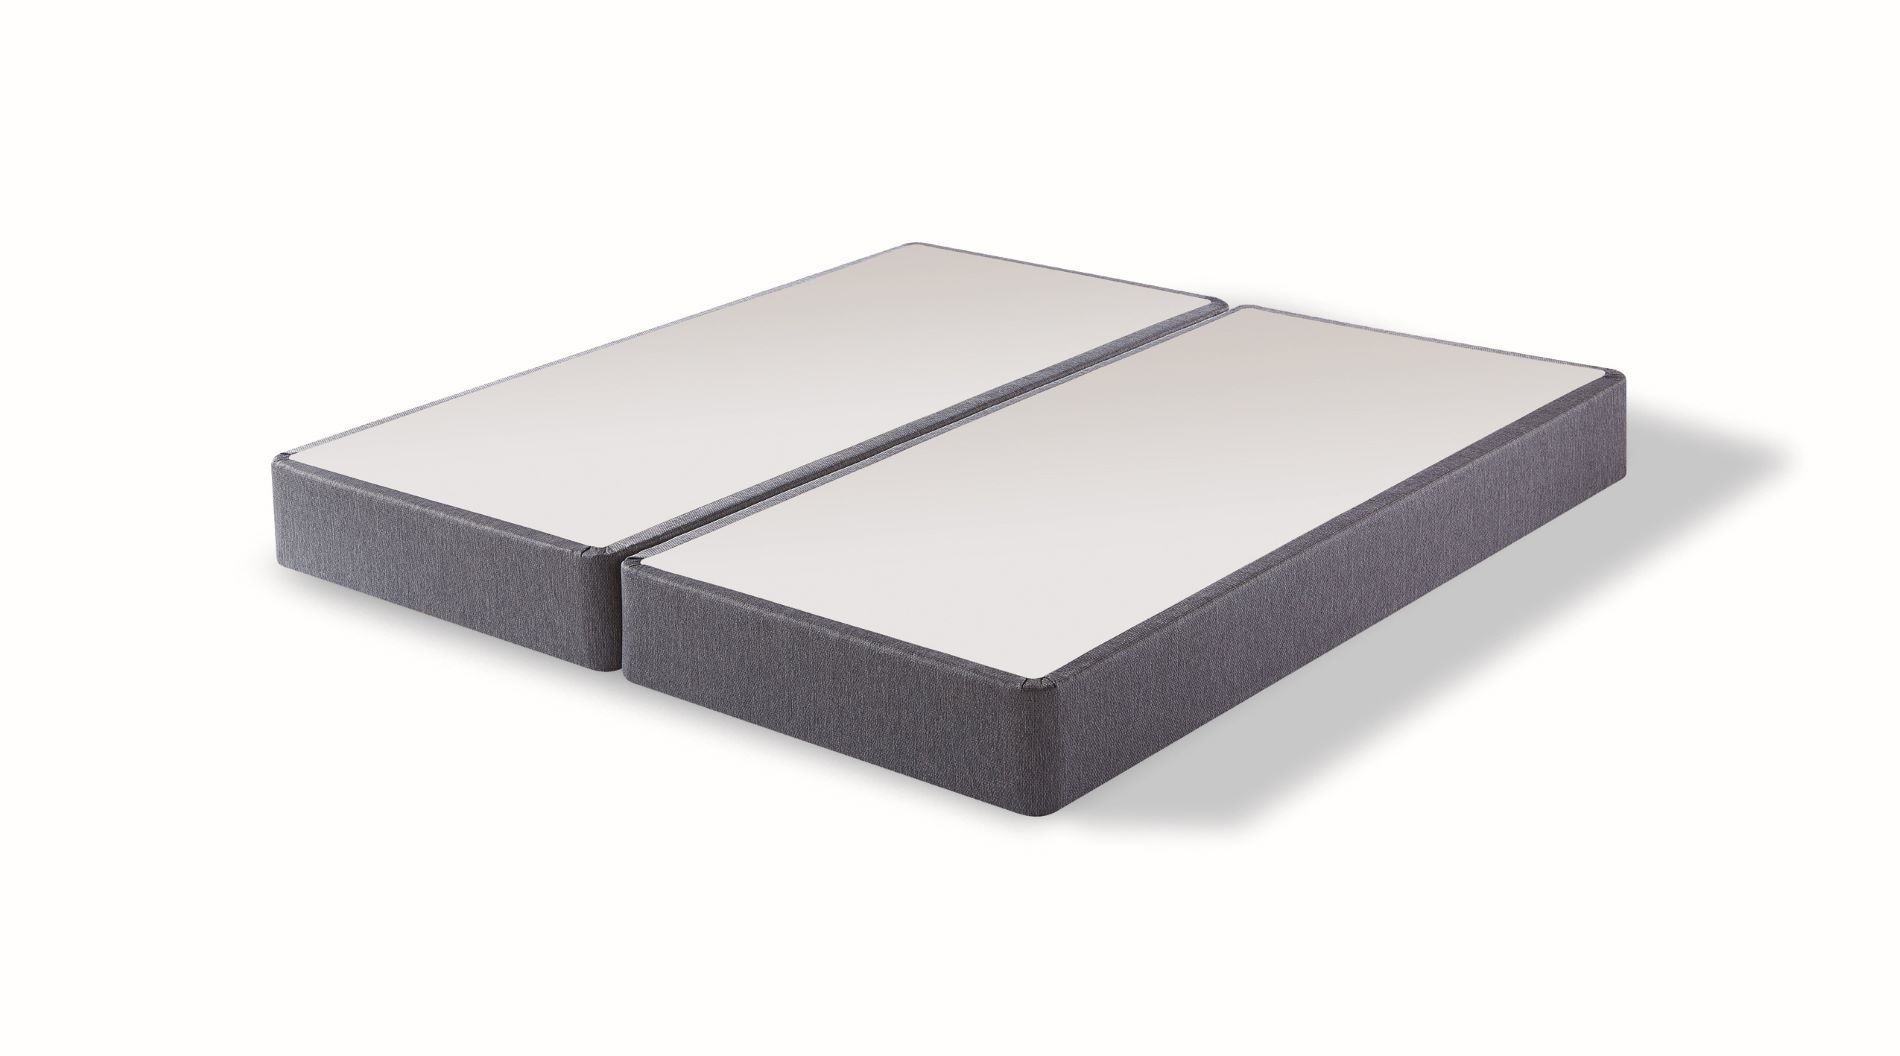 Serta Perfect Sleeper Box Split Queen - (Must purchase 2 for complete set)